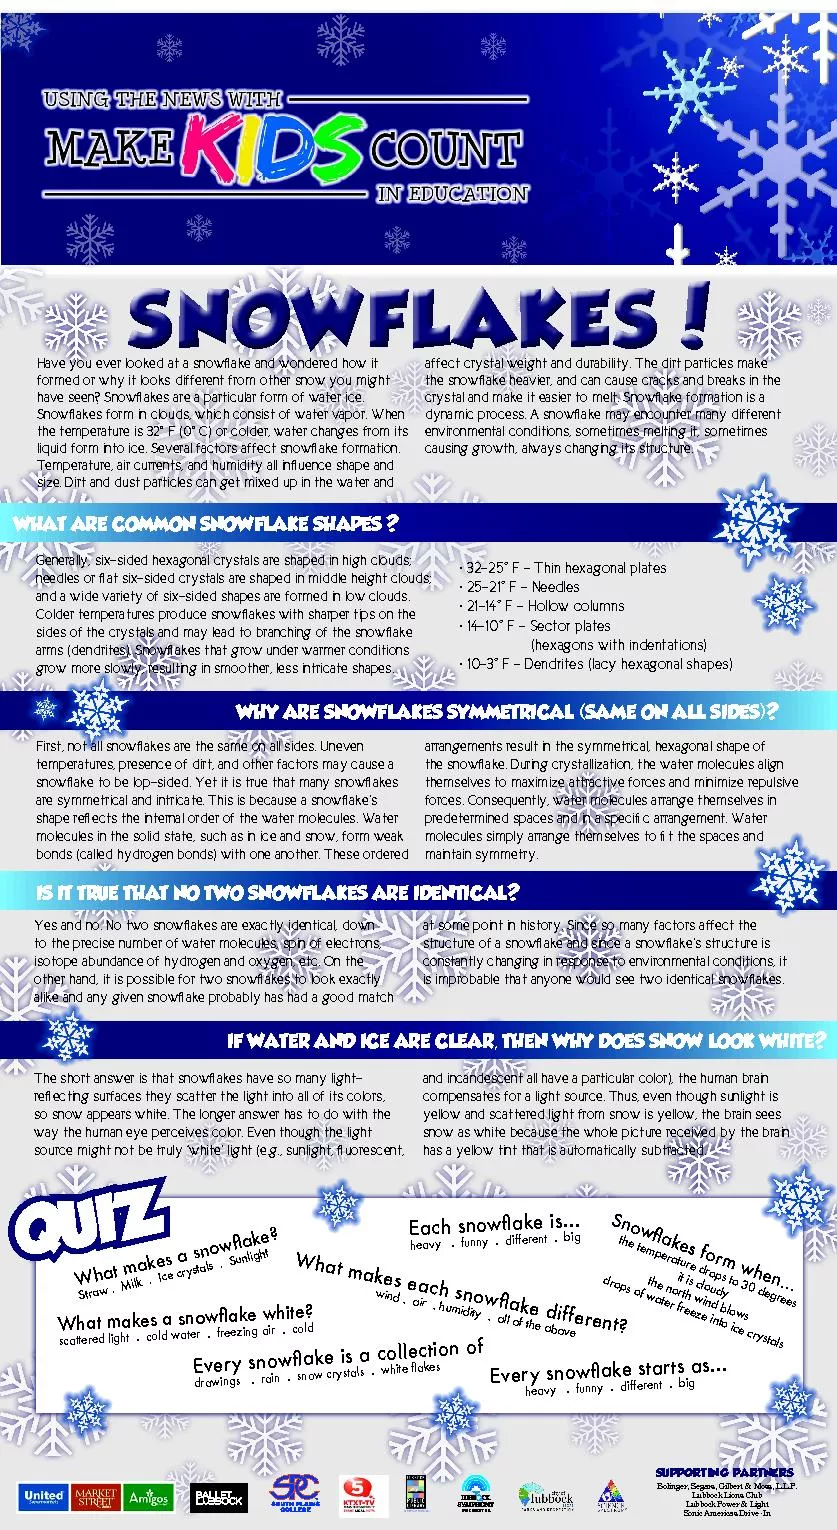 WHAT ARE COMMON SNOWFLAKE SHAPES ?